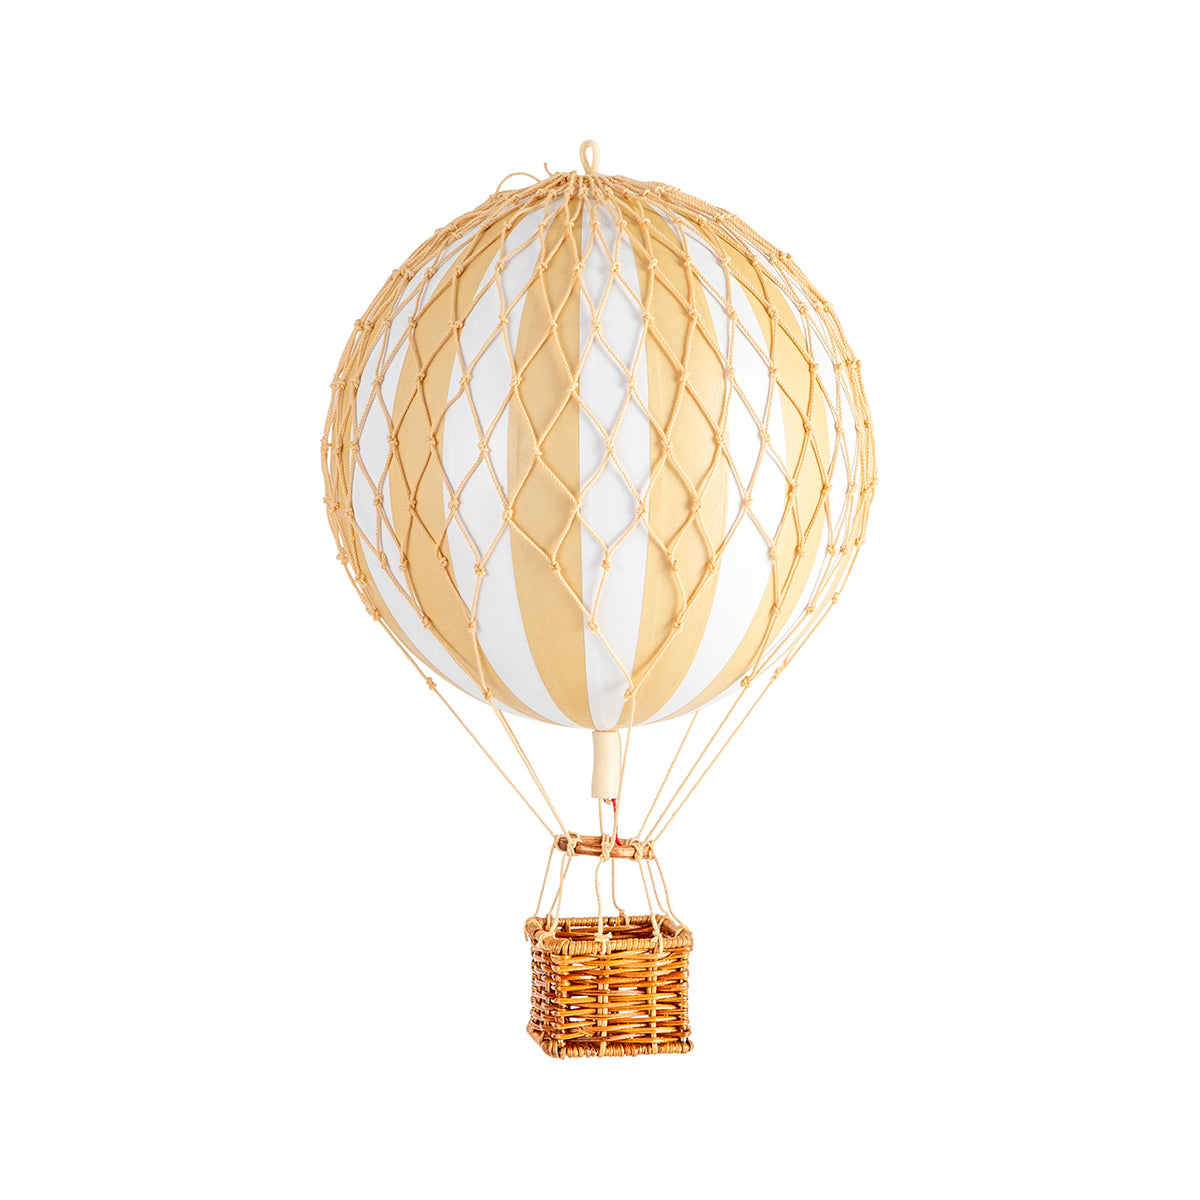 Description: A quirky Wonderen Small Hot Air Balloon with a basket, combining imagination and science.